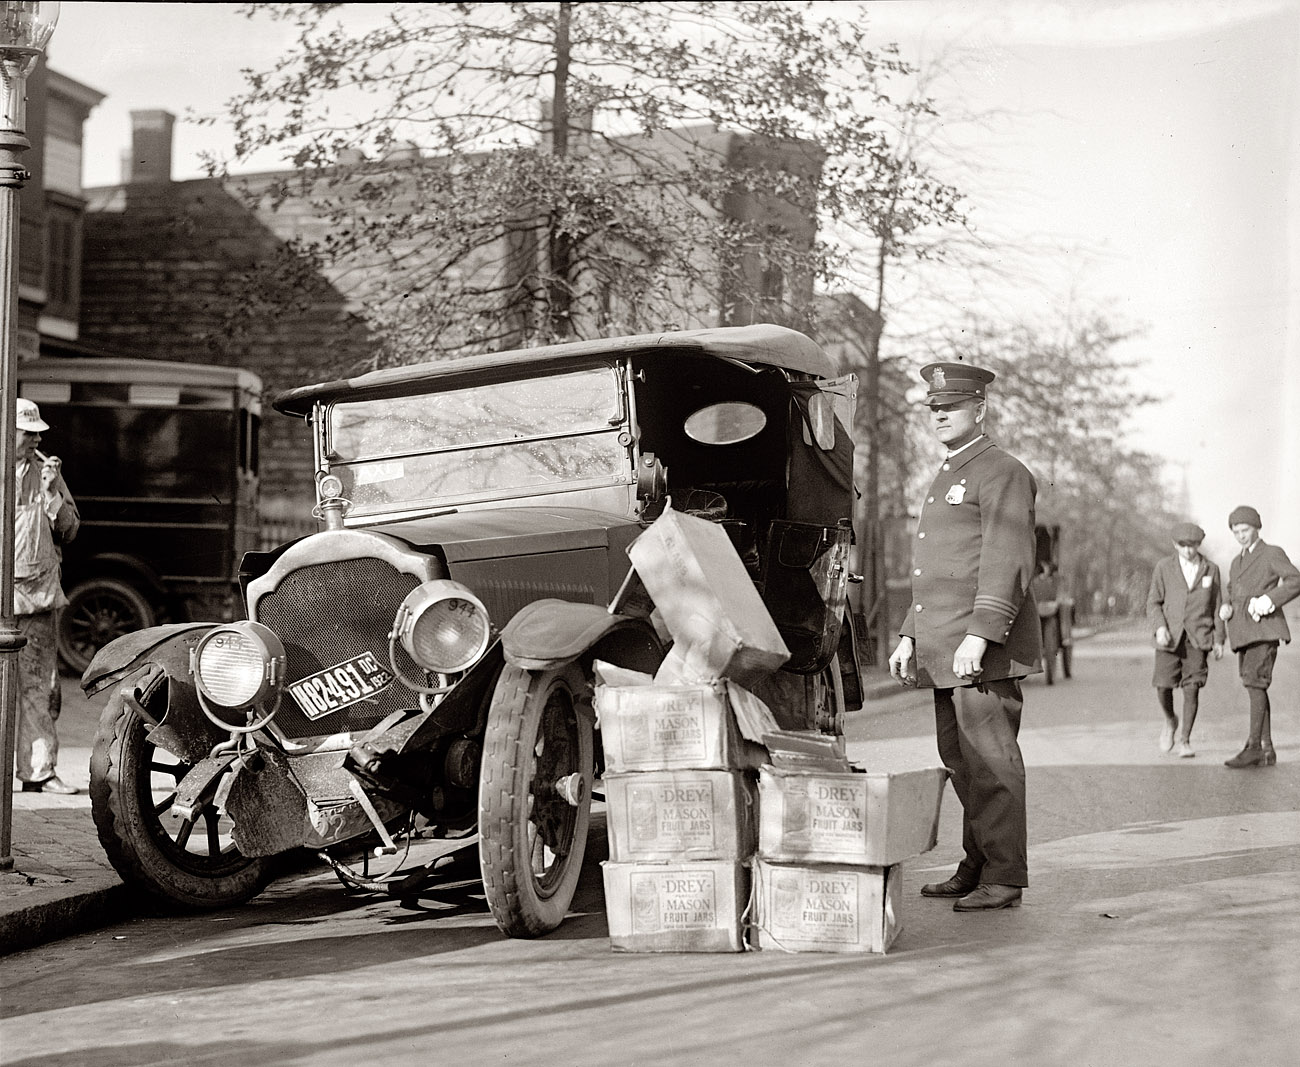 November 16, 1922. Cases of moonshine next to wreck of bootlegger's car in Washington, D.C. View full size. National Photo Company Collection.